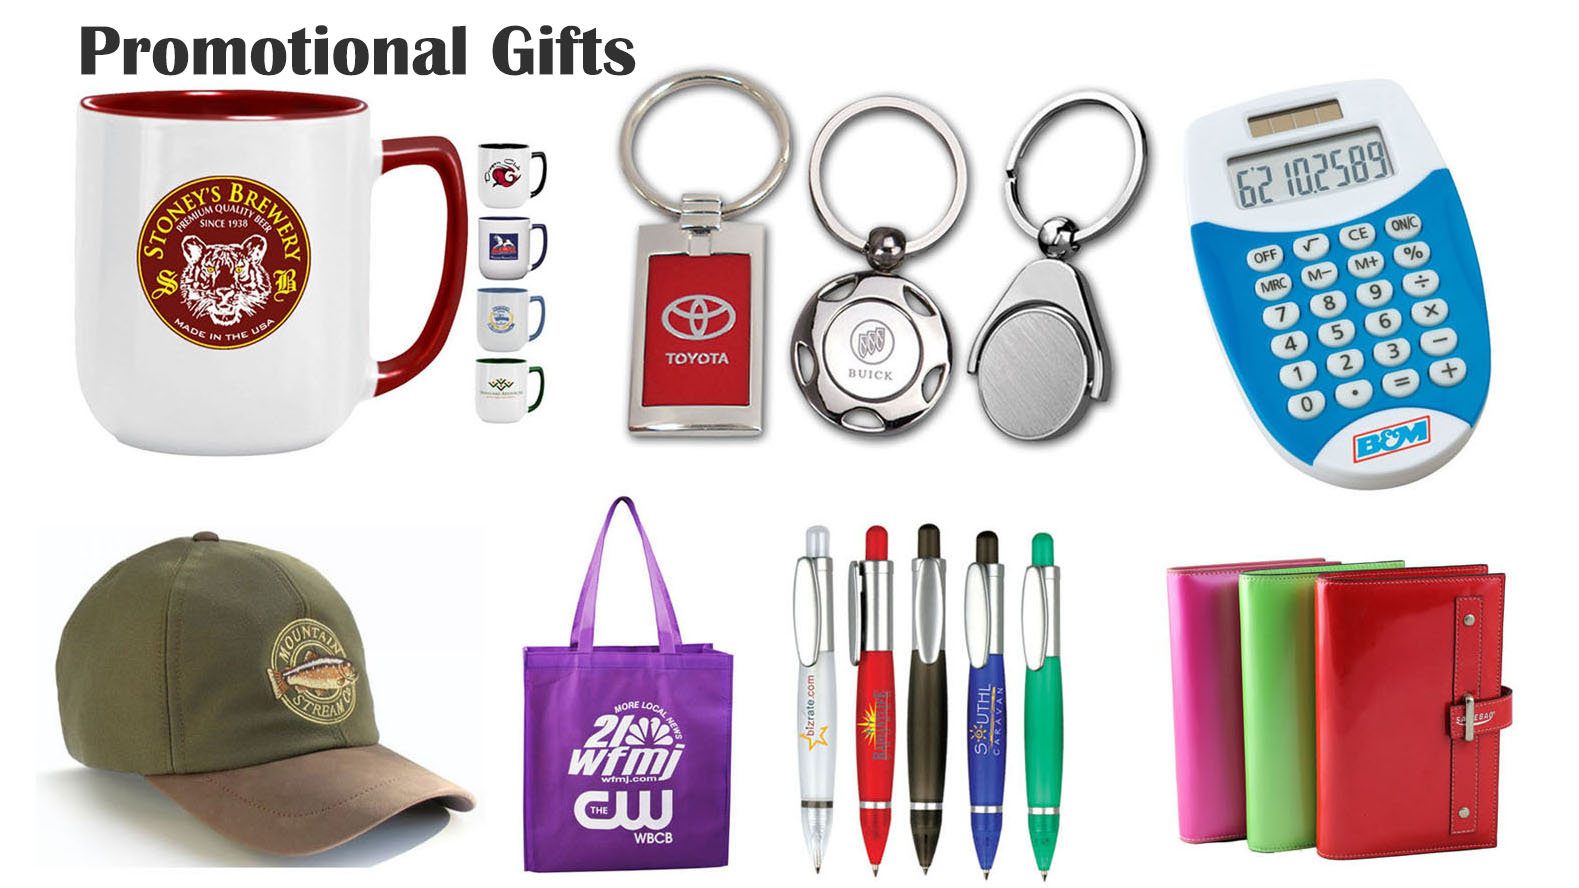 Bojia Promotional Gifts